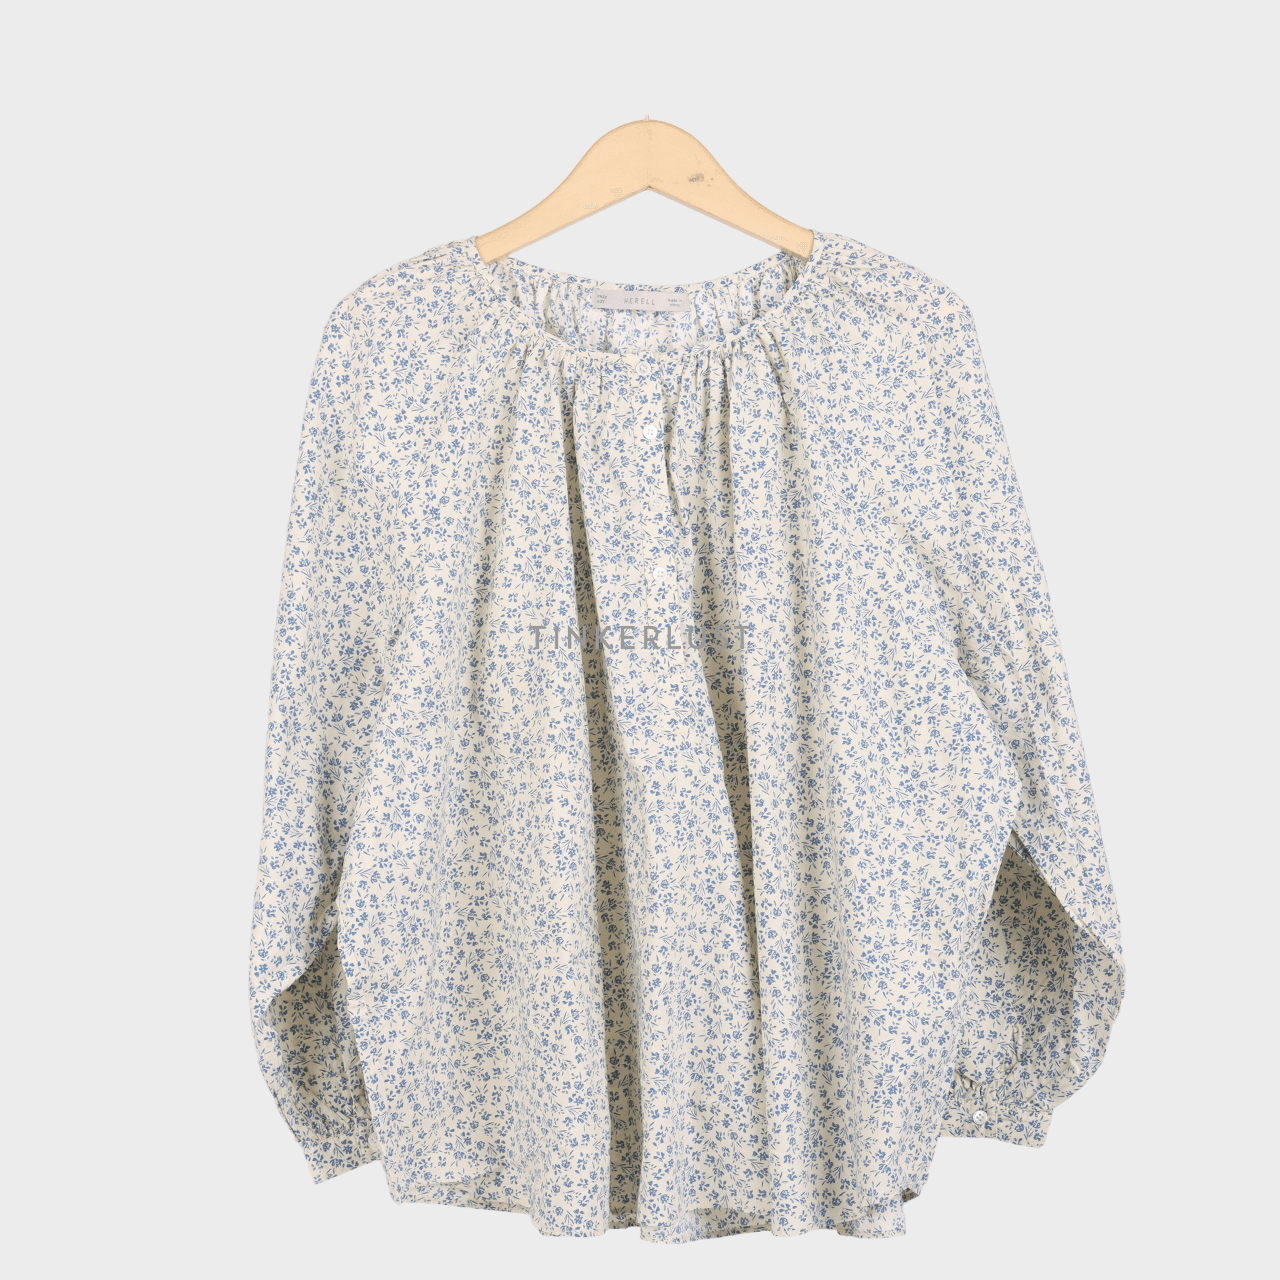 Herell Cream Floral Blouse